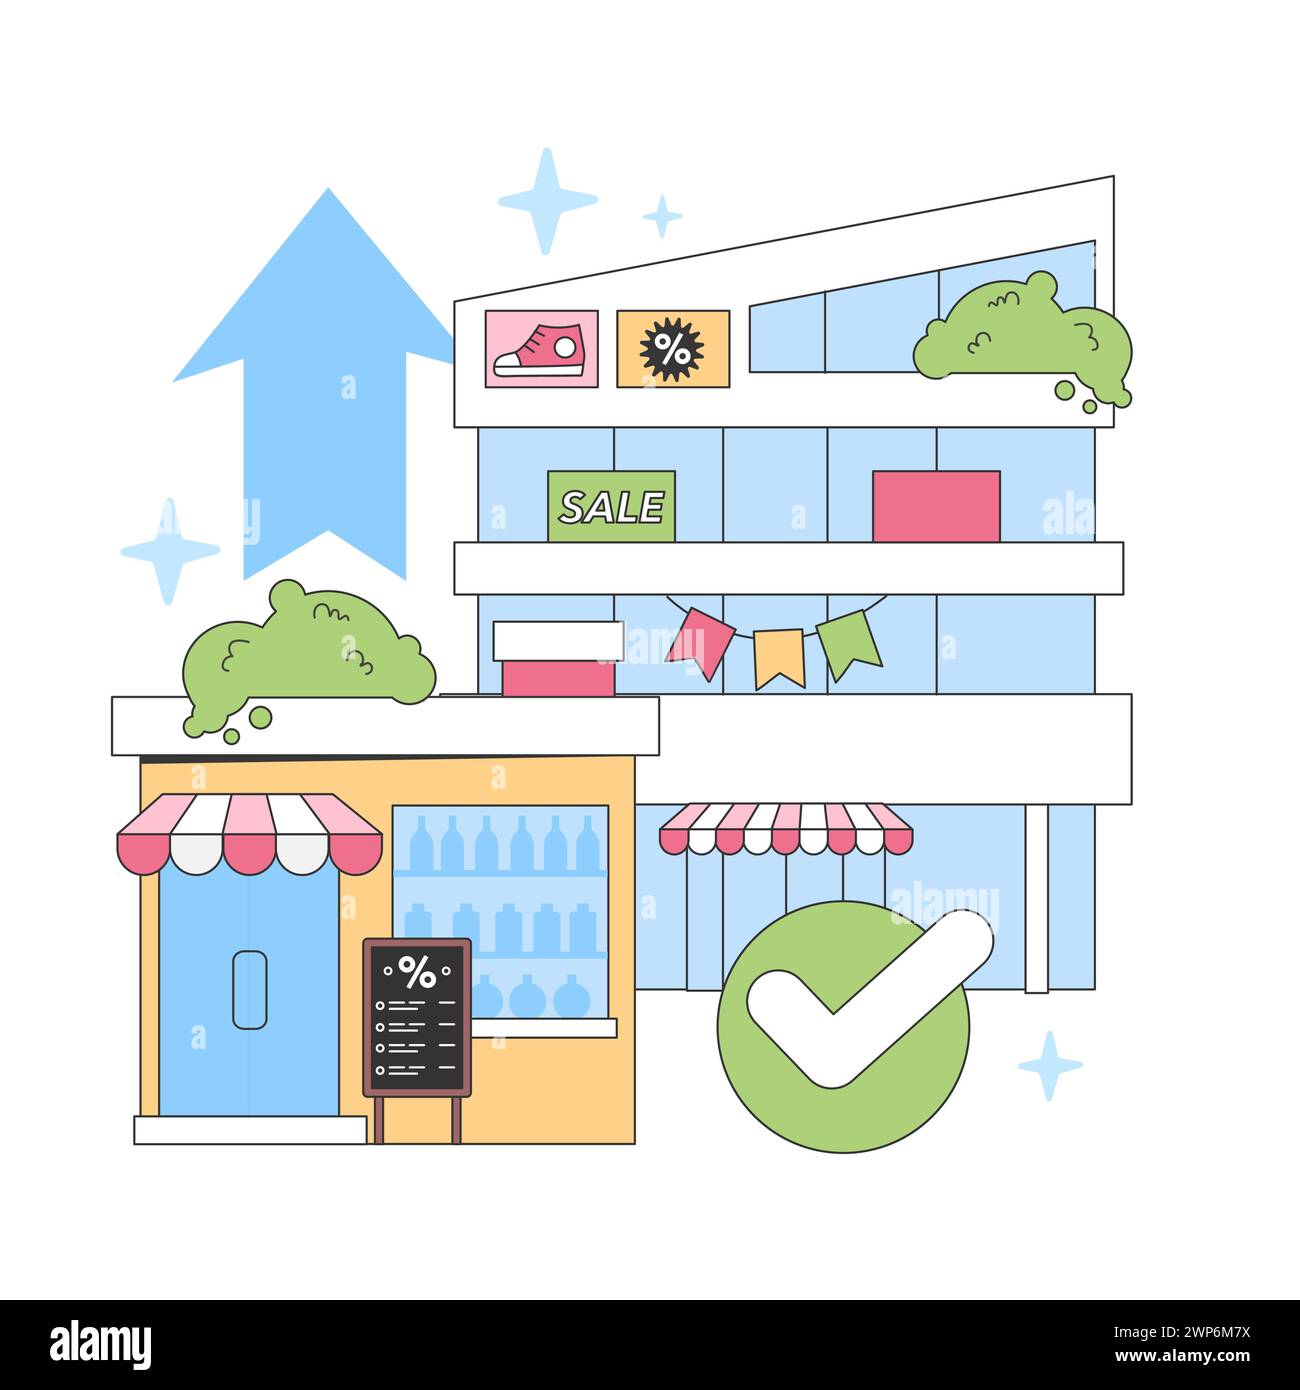 Retail Boost concept. Modern store building showcasing sale items and discount board, with a large upward arrow indicating growth and a checkmark symbolizing success. Flat vector illustration Stock Vector